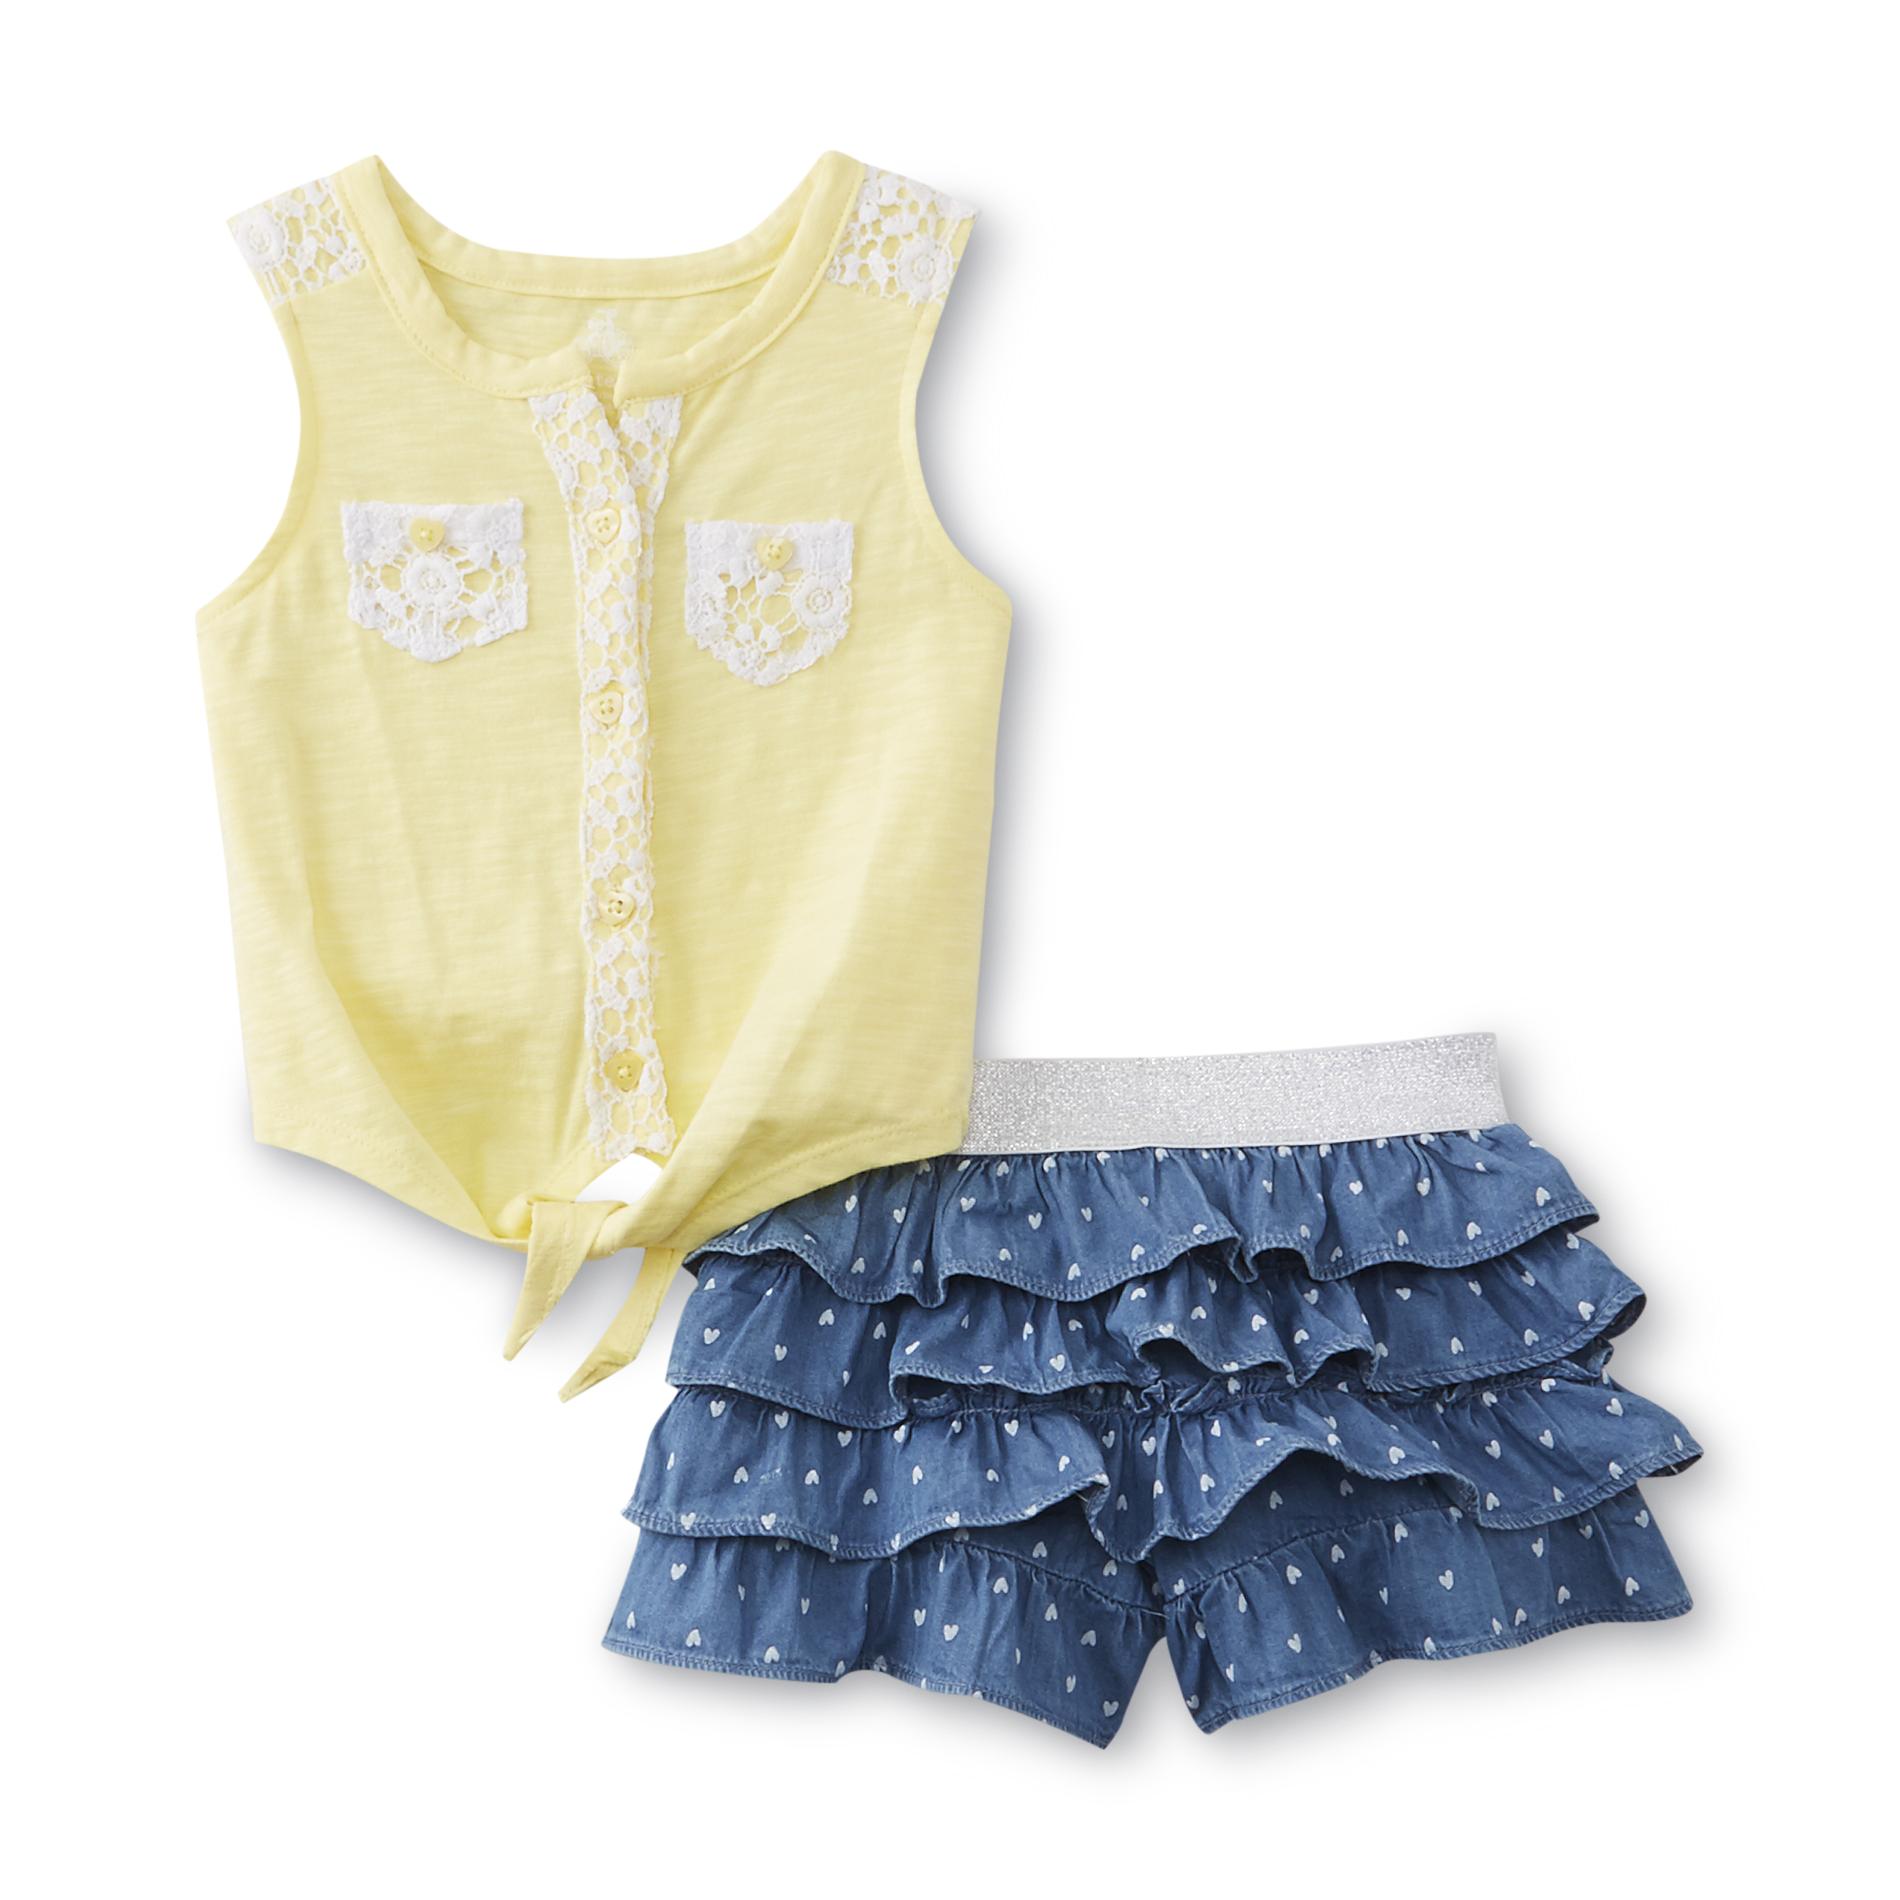 Route 66 Infant & Toddler Girl's Tank Top & Shorts - Hearts